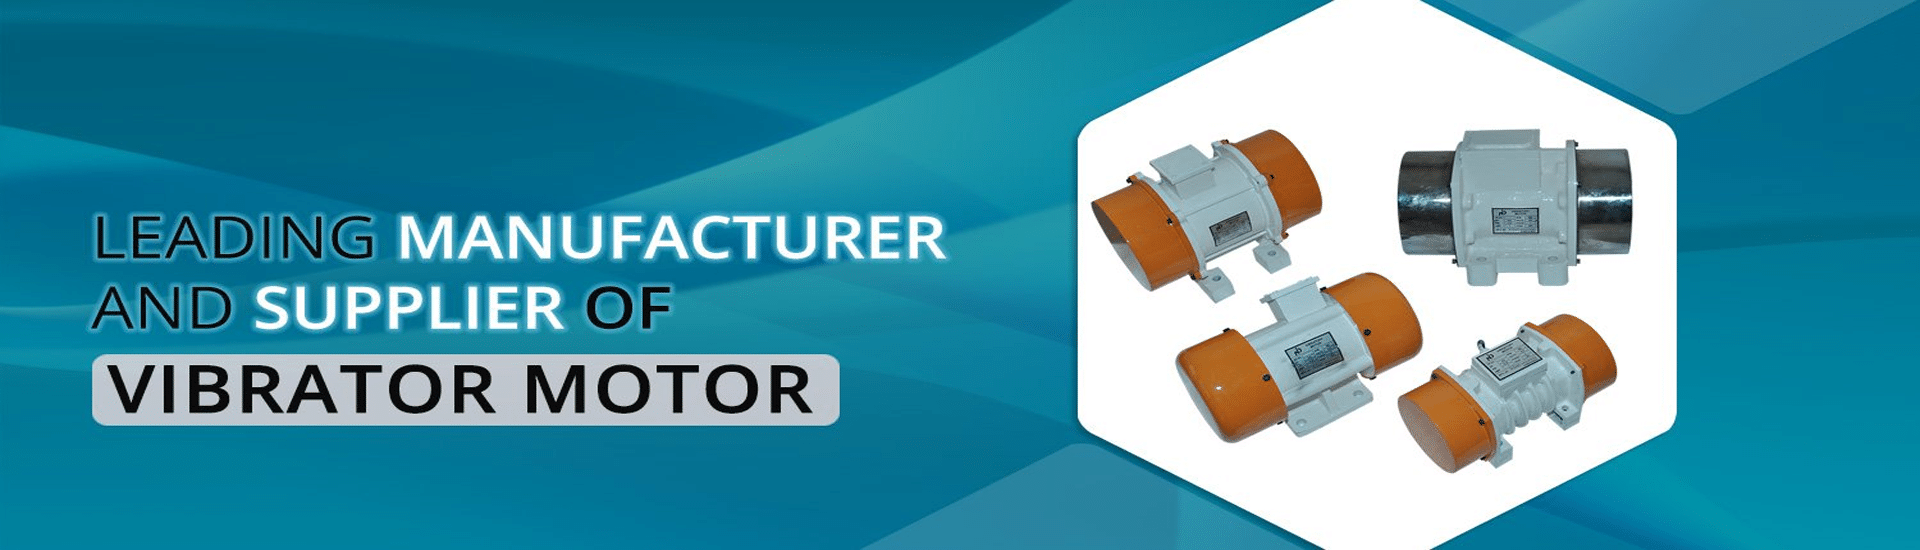 Leading manufacturer and supplier in vibrator motor